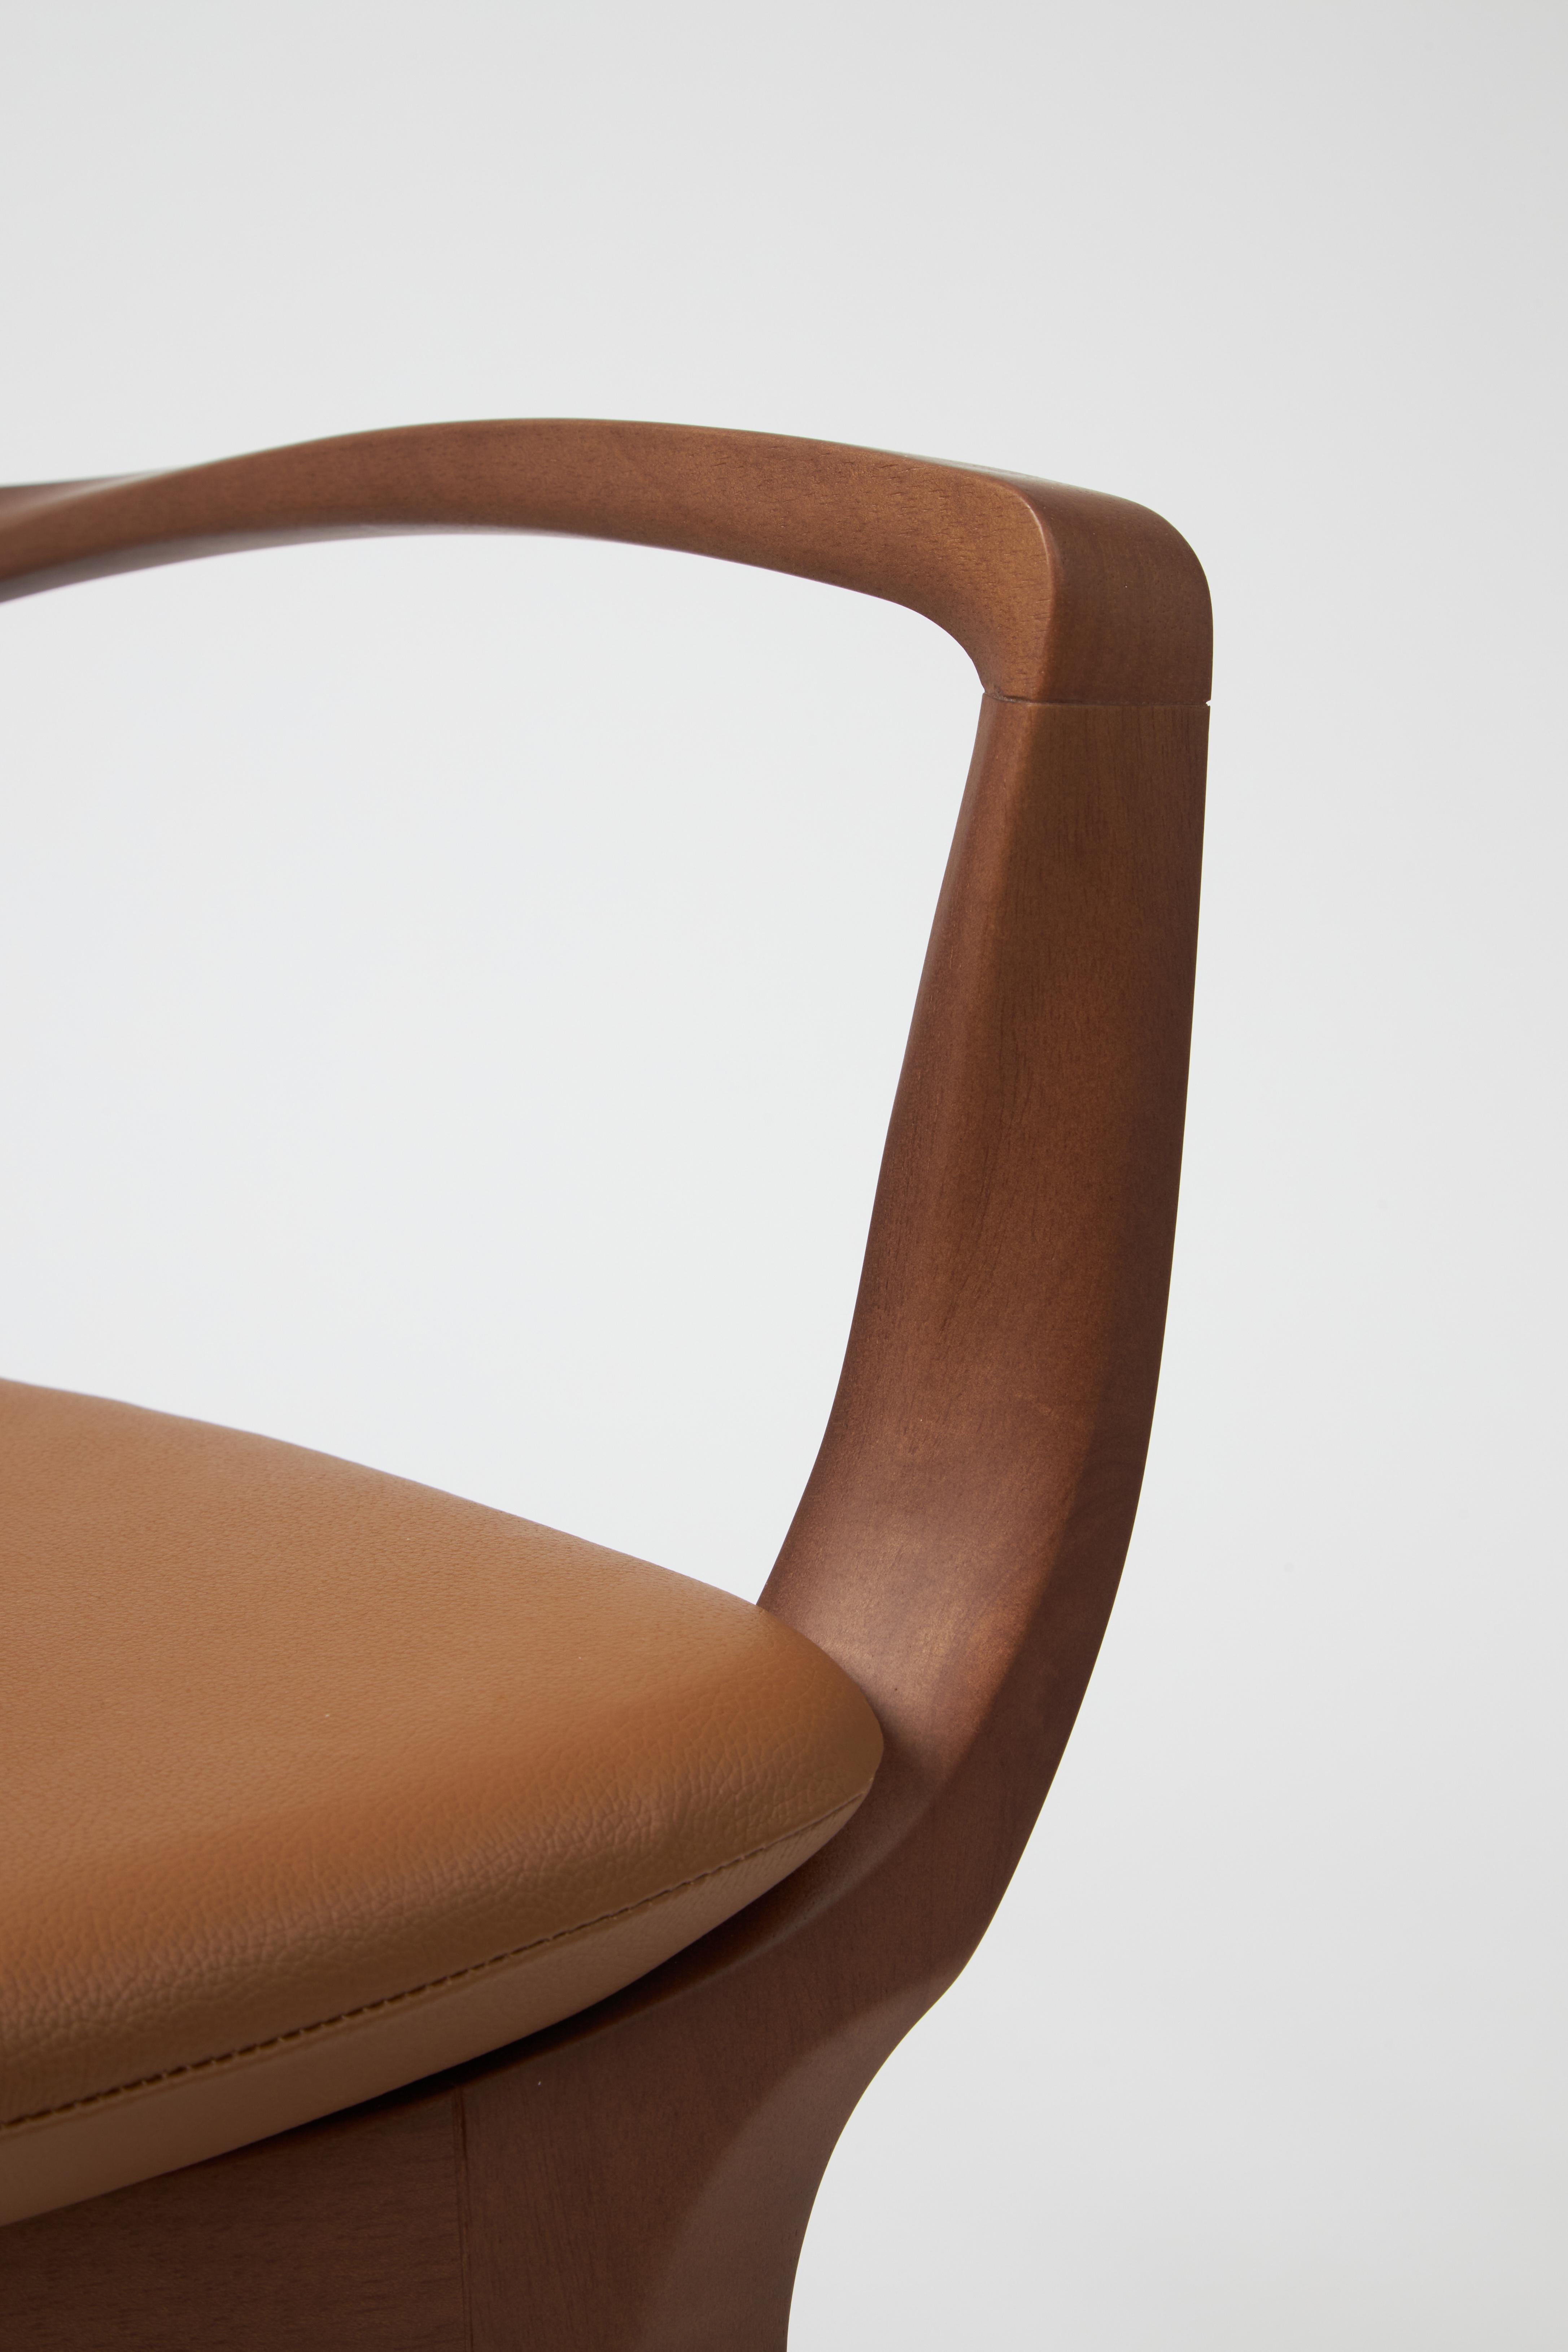 Contemporary Modern Style Aurora Chair Sculpted in Walnut Finish Arms, leather back & seating For Sale